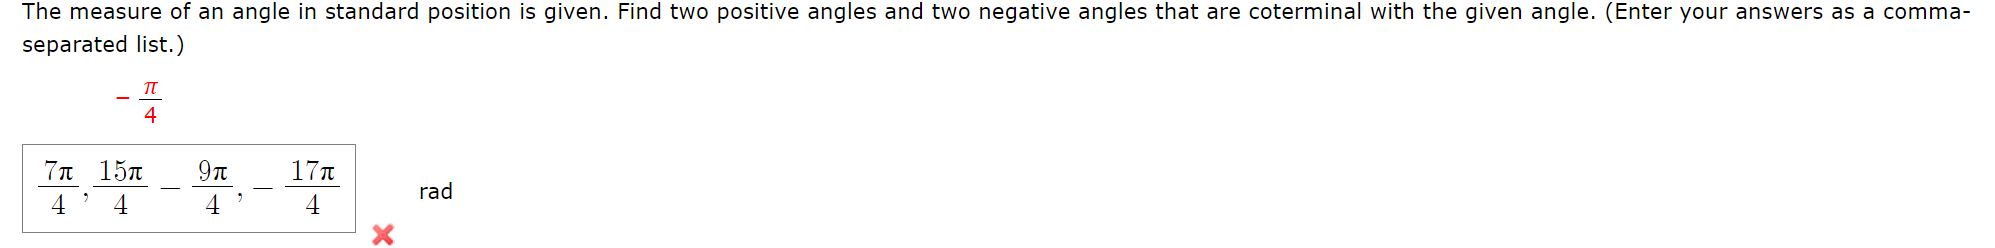 The measure of an angle in standard position is given. Find two positive angles and two negative angles that are coterminal with the given angle. (Enter your answers as a comma-
separated list.)
4
